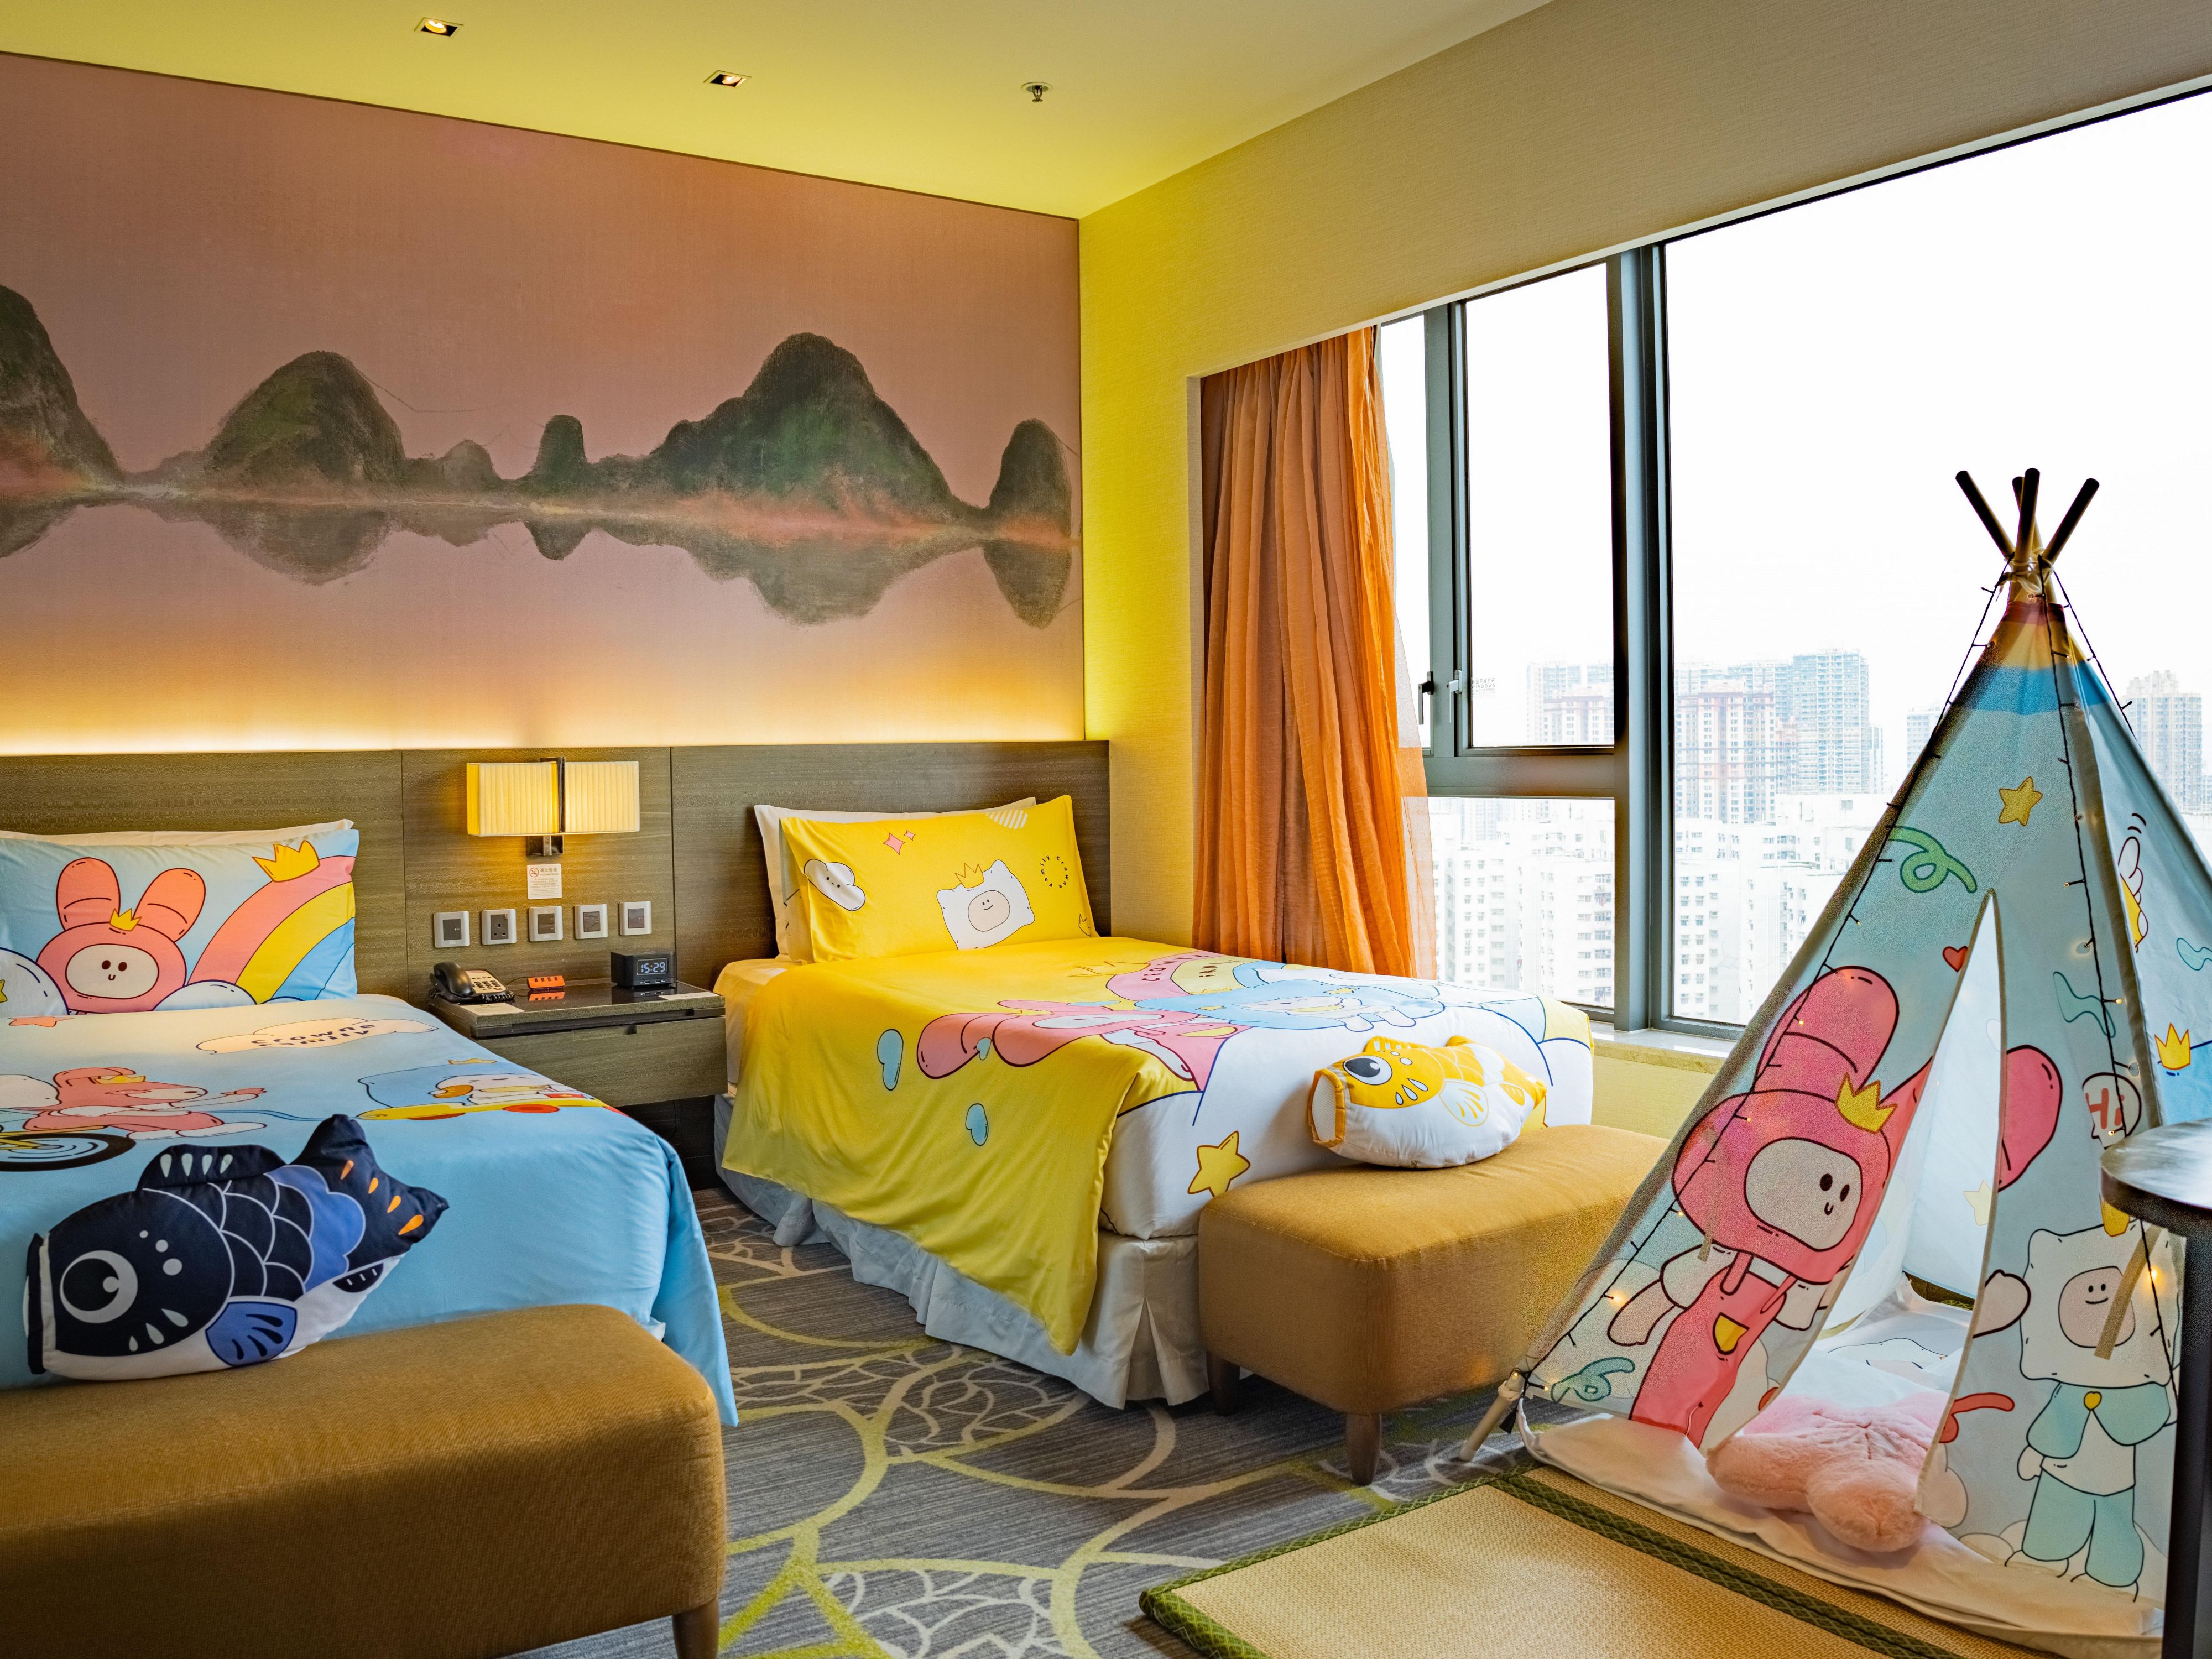 Experience the joy of meeting our Crowne Plaza mascots, the Crowne Family, in our specially designed Crowne Family Theme Room. With the magical blessings from the Crowne Family members, we guarantee you and your family will have a memorable stay and delightful dreams with us.